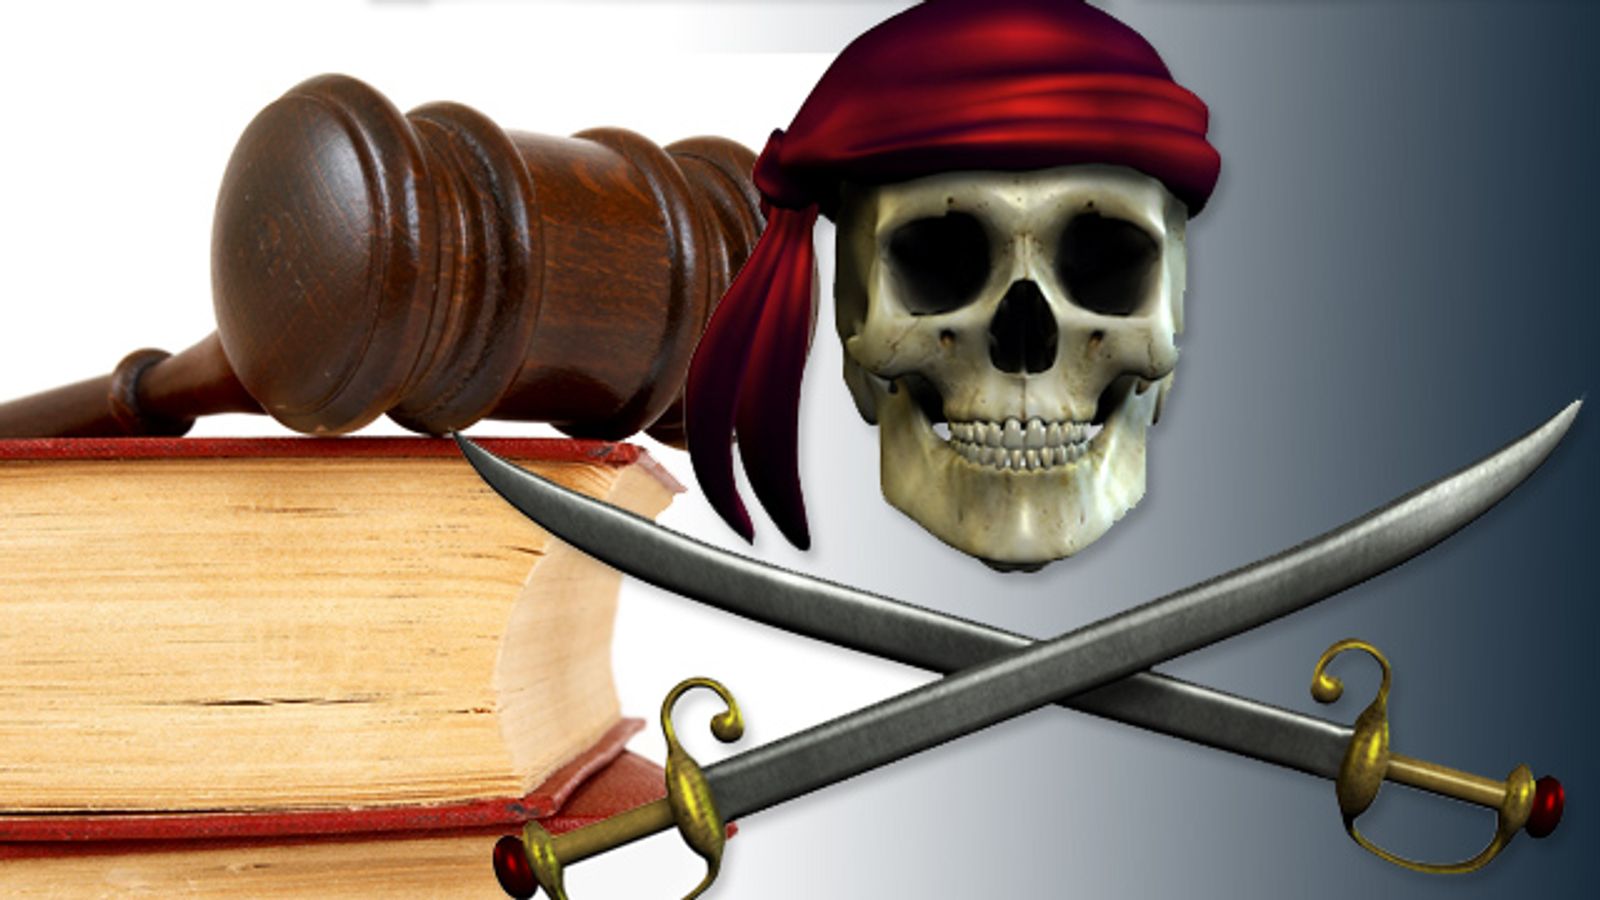 Europe Ramps Up Piracy Crackdowns